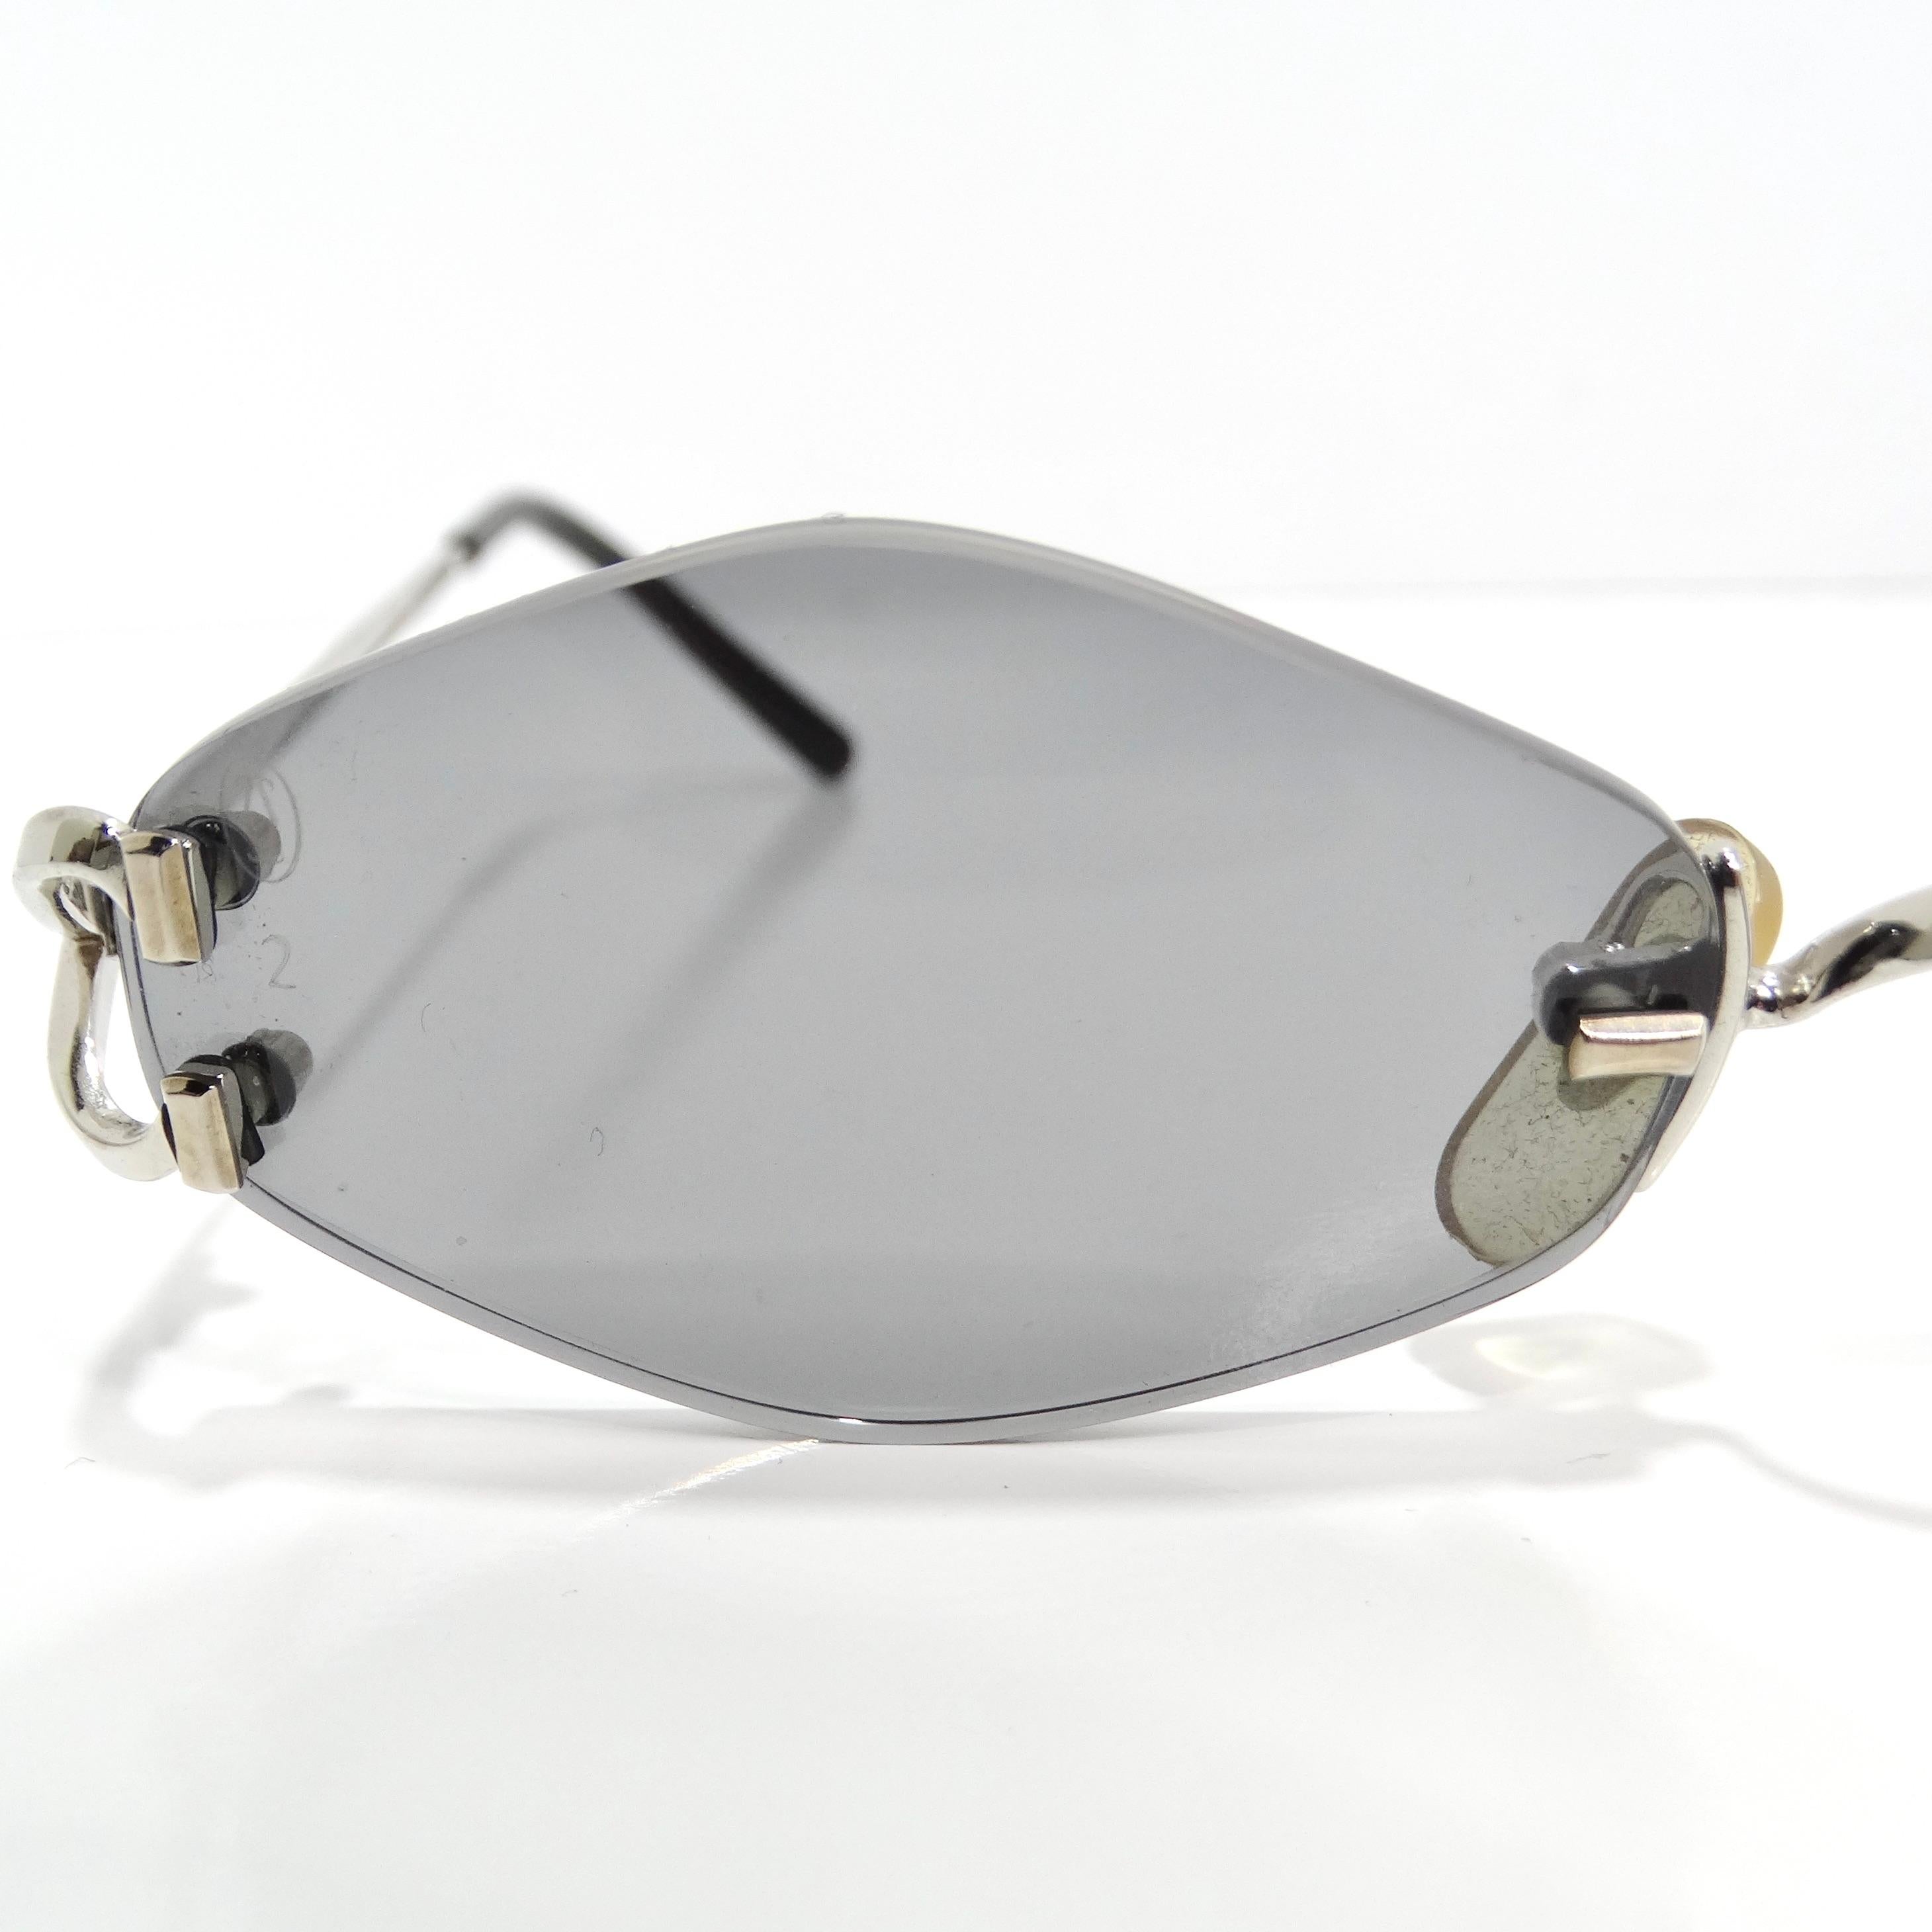 Introducing the Cartier 1990s Silver Tone Rimless Sunglasses, a stunning and luxurious accessory that embodies timeless elegance and sophistication. Meticulously crafted with attention to detail, these rimless sunglasses are designed to make a bold